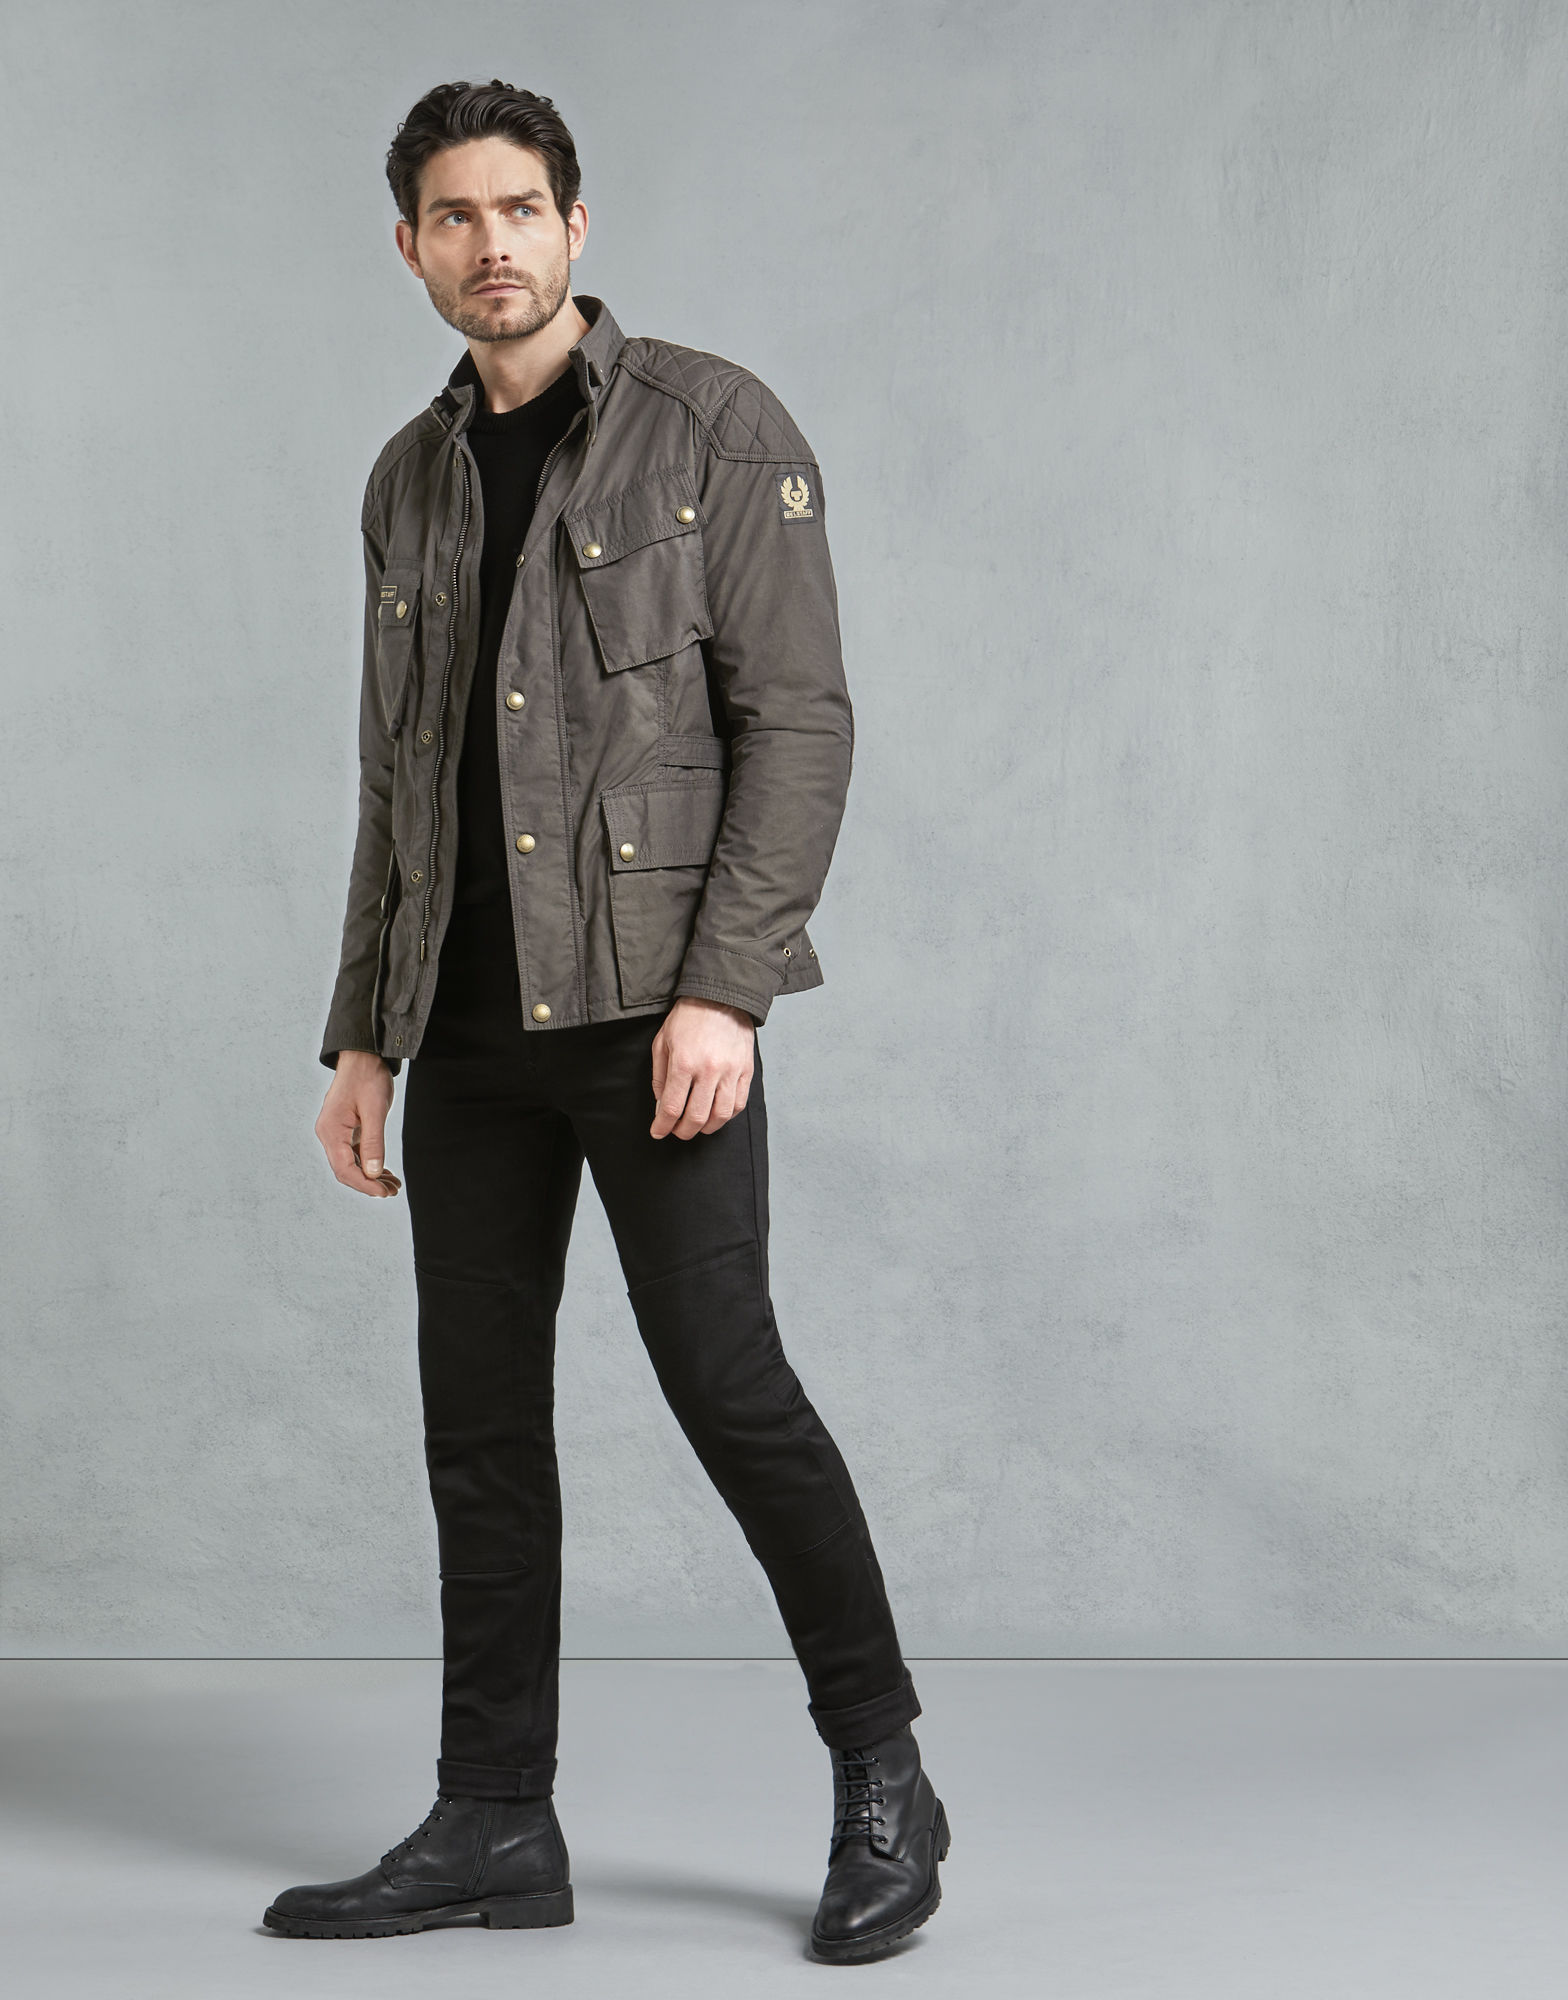 Men's Fall Must-Haves